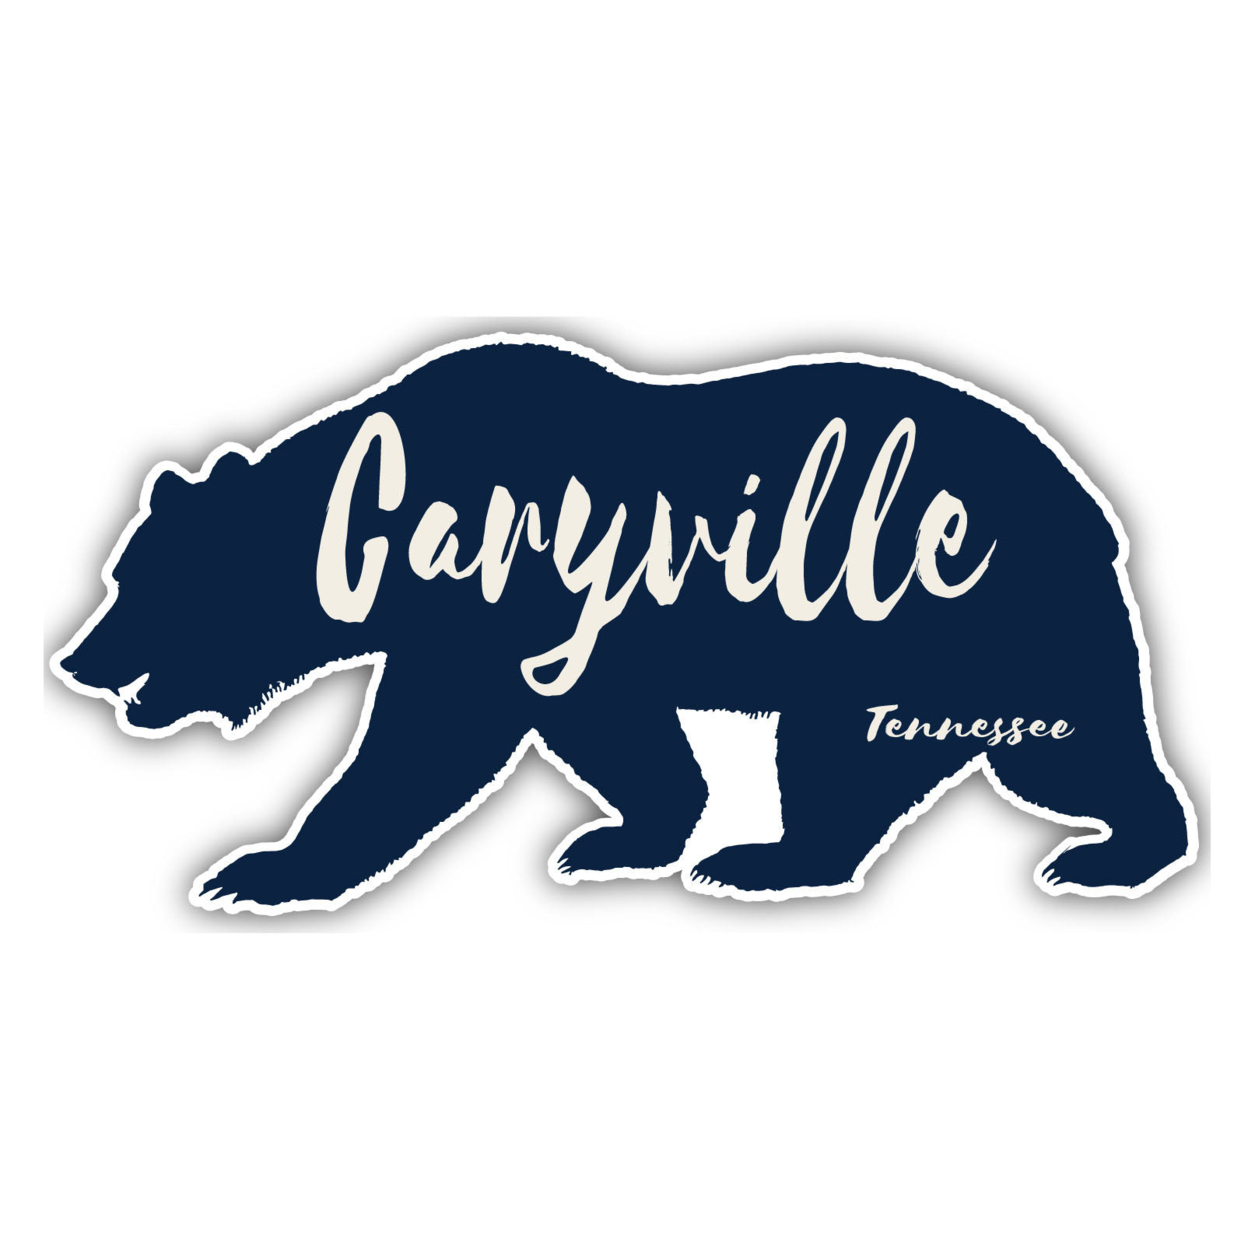 Caryville Tennessee Souvenir Decorative Stickers (Choose Theme And Size) - Single Unit, 4-Inch, Tent